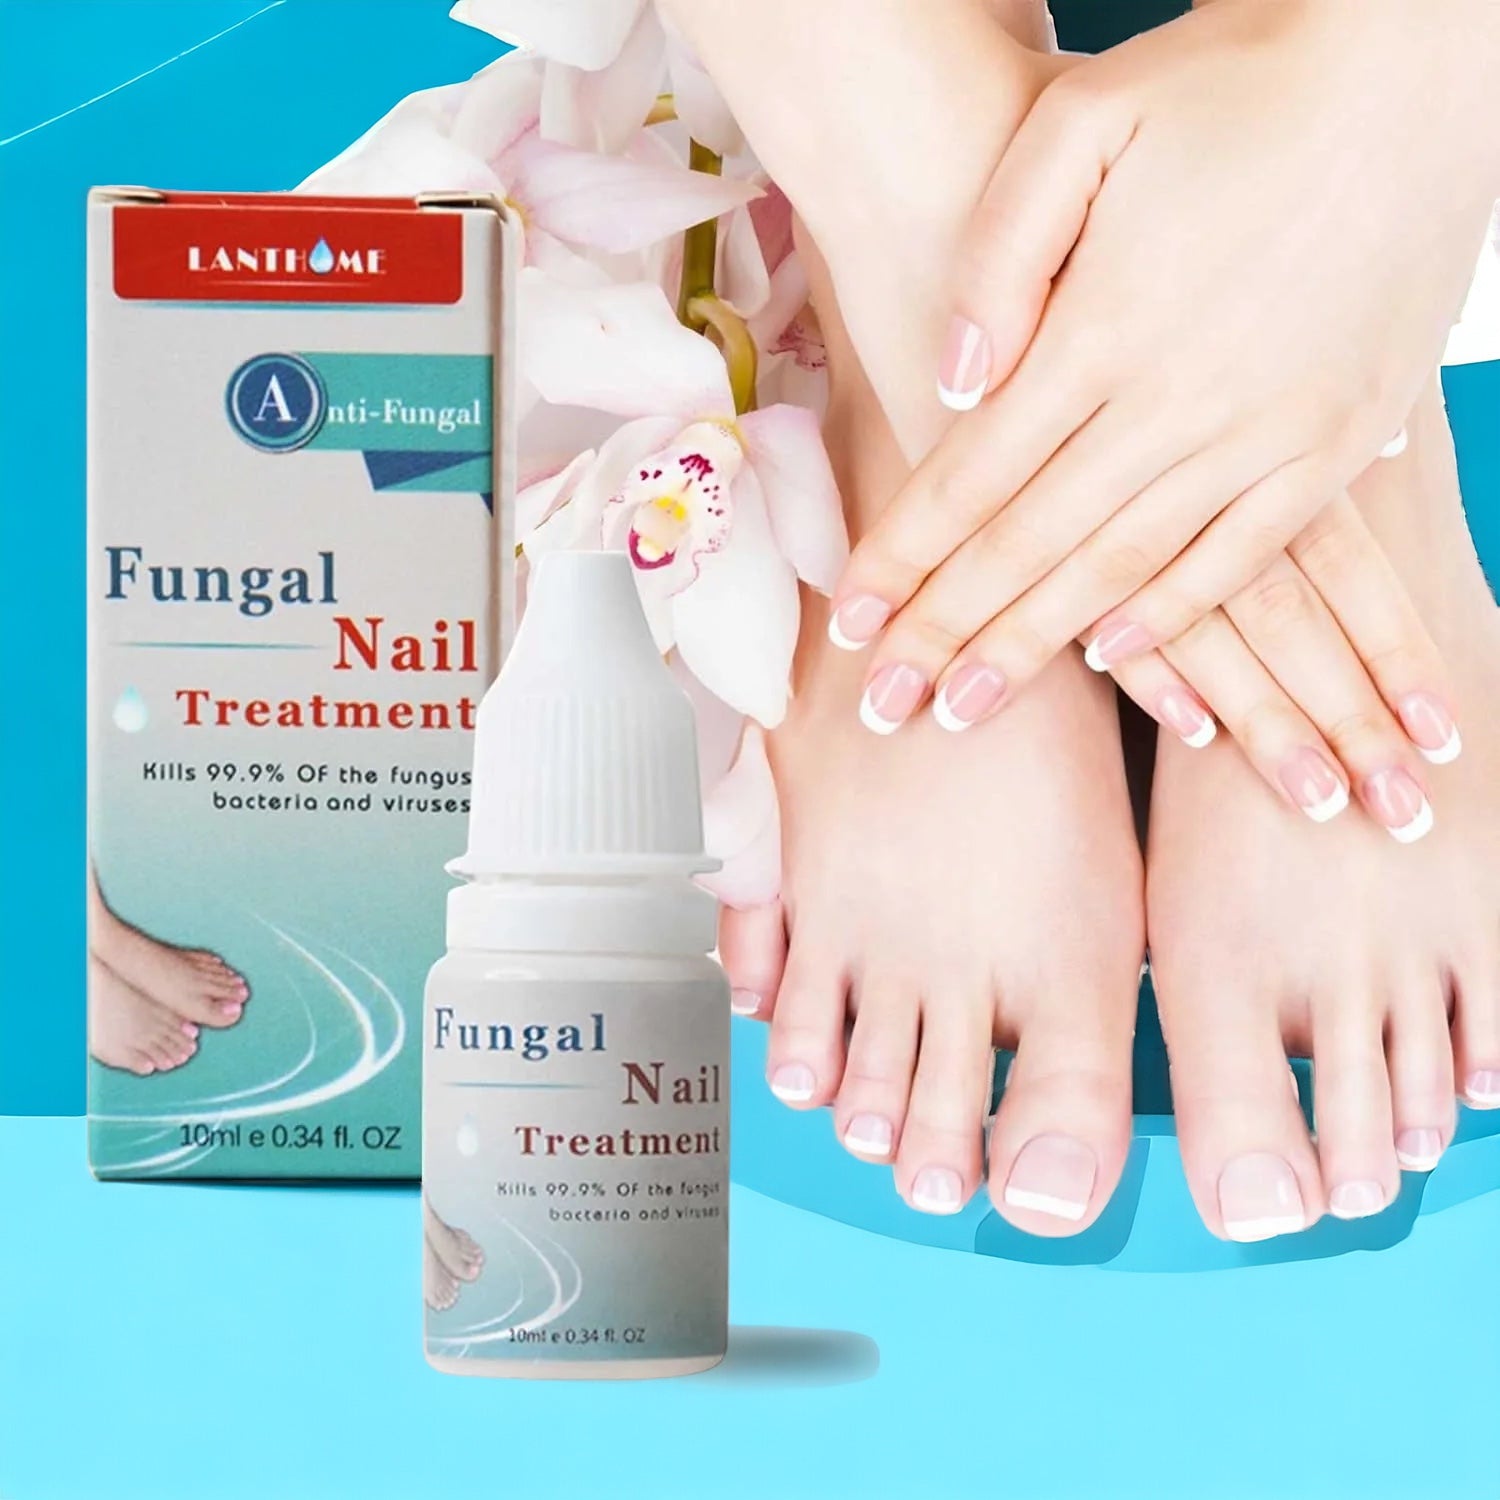 7 Best Toenail Fungus Treatment 2023: How to Prevent Athlete's Foot